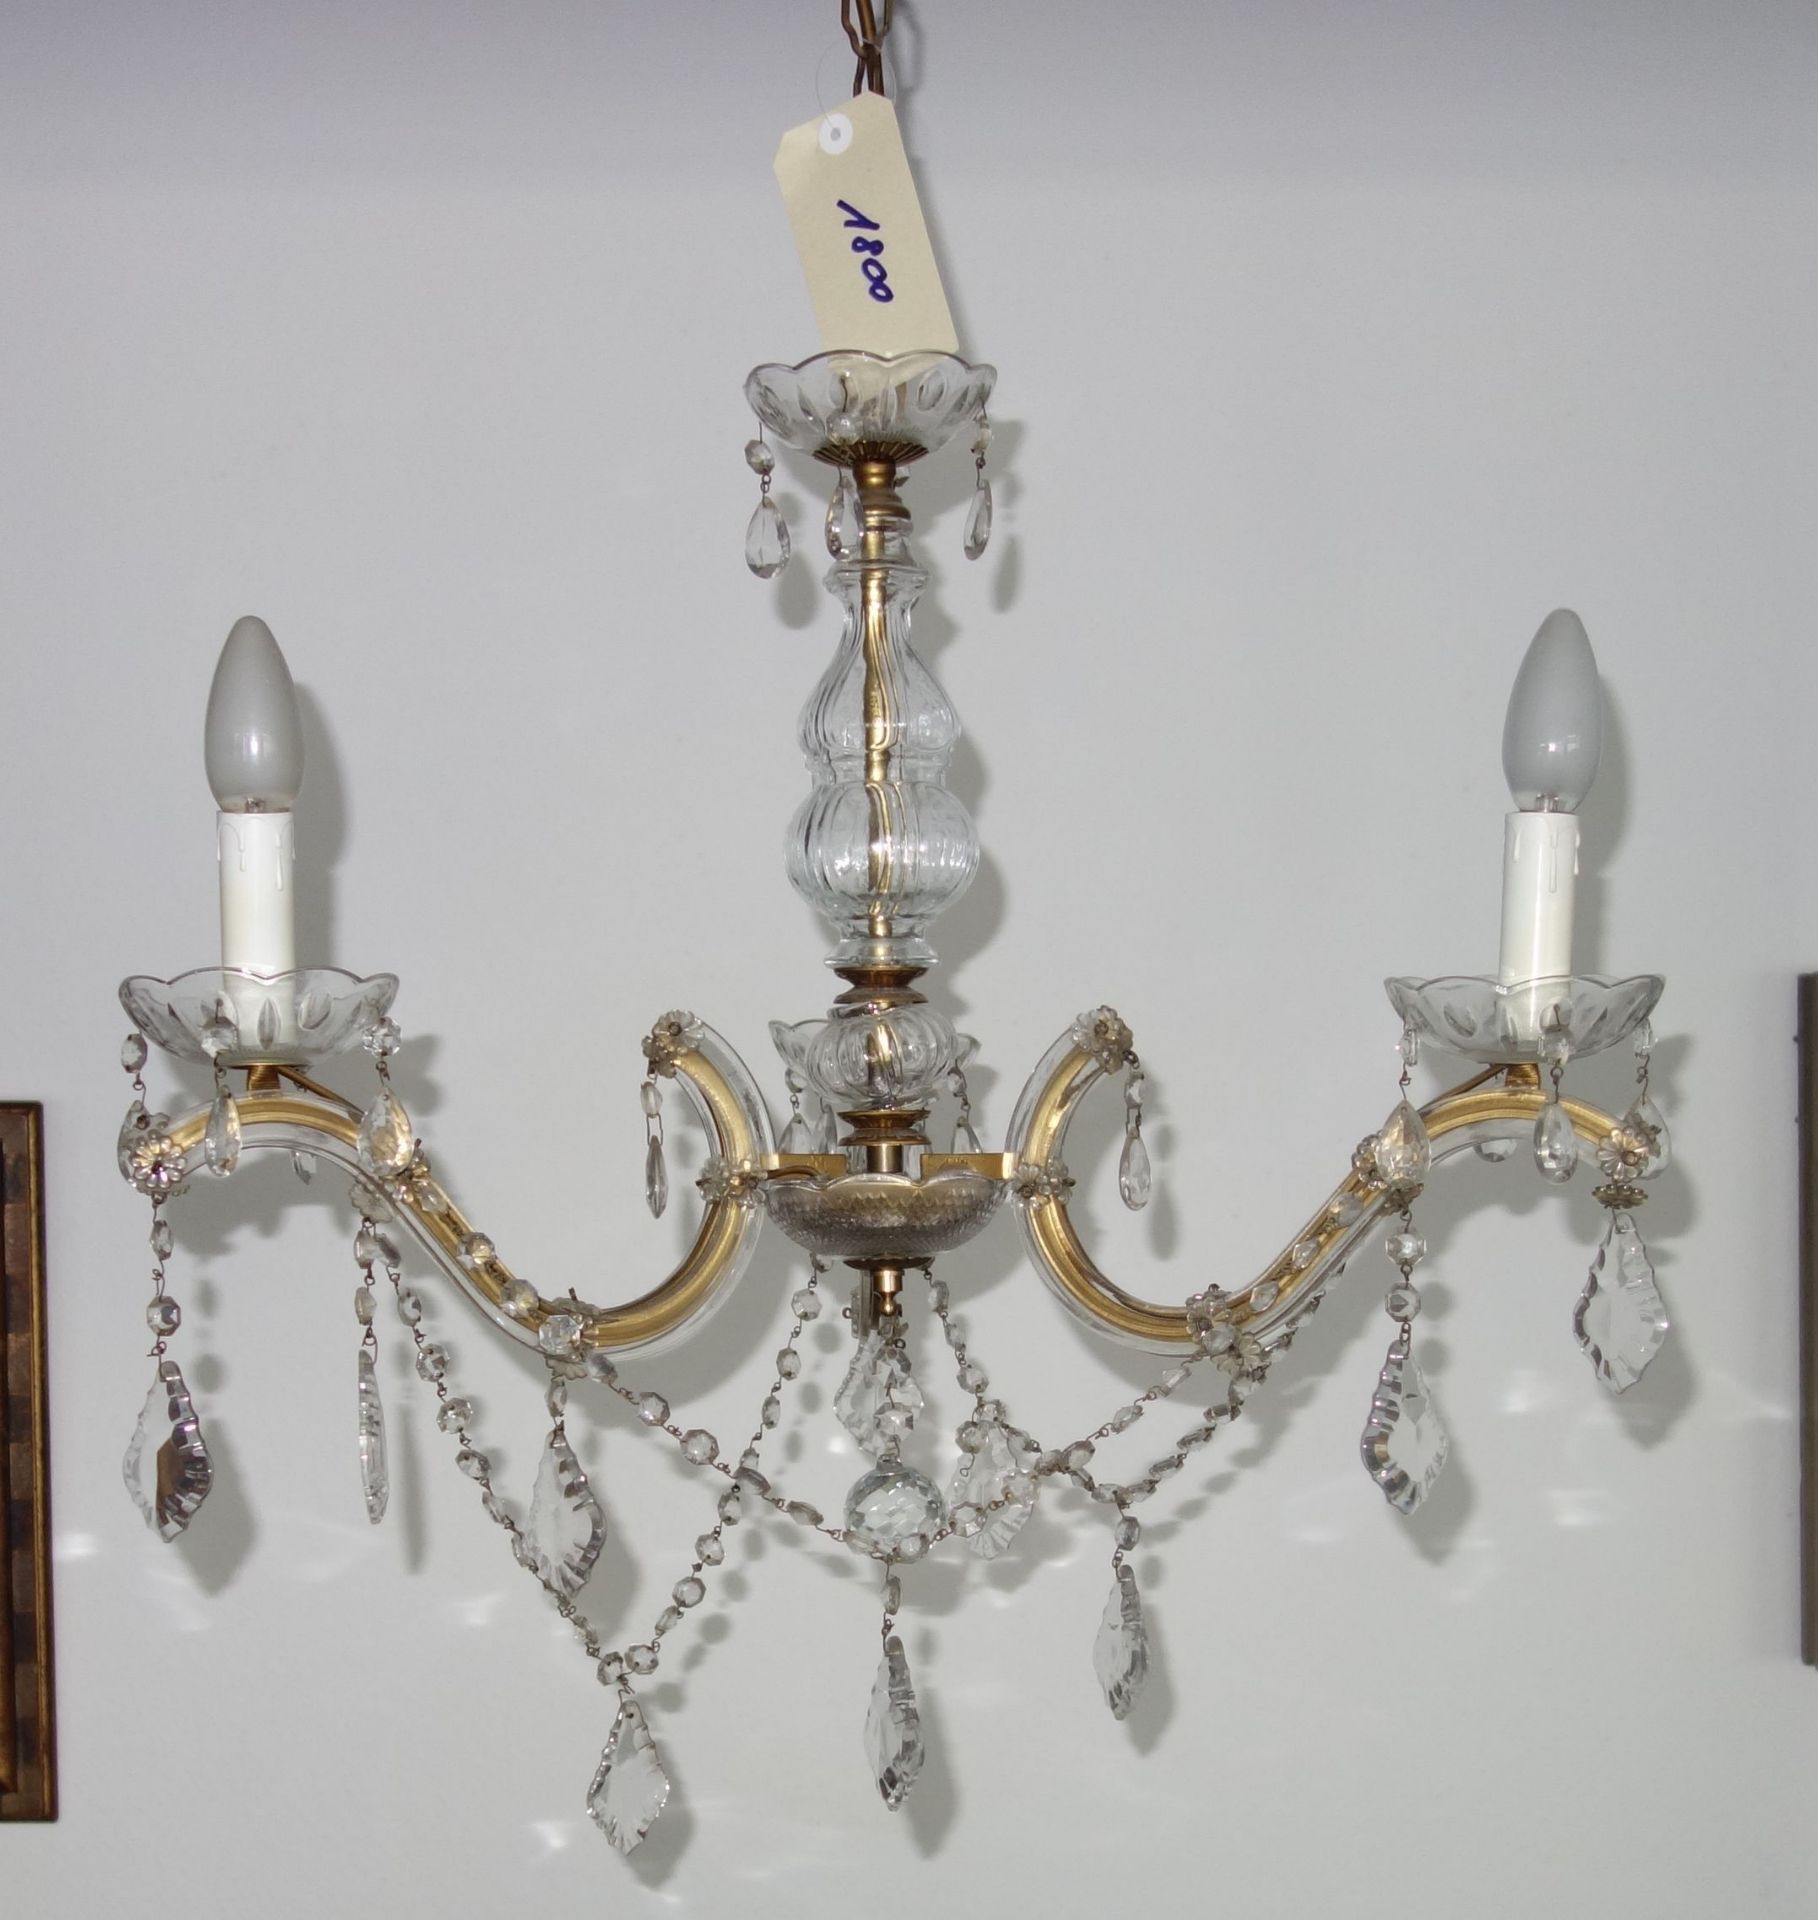 MARIA-THERESIA-CHANDELIER - Image 3 of 3